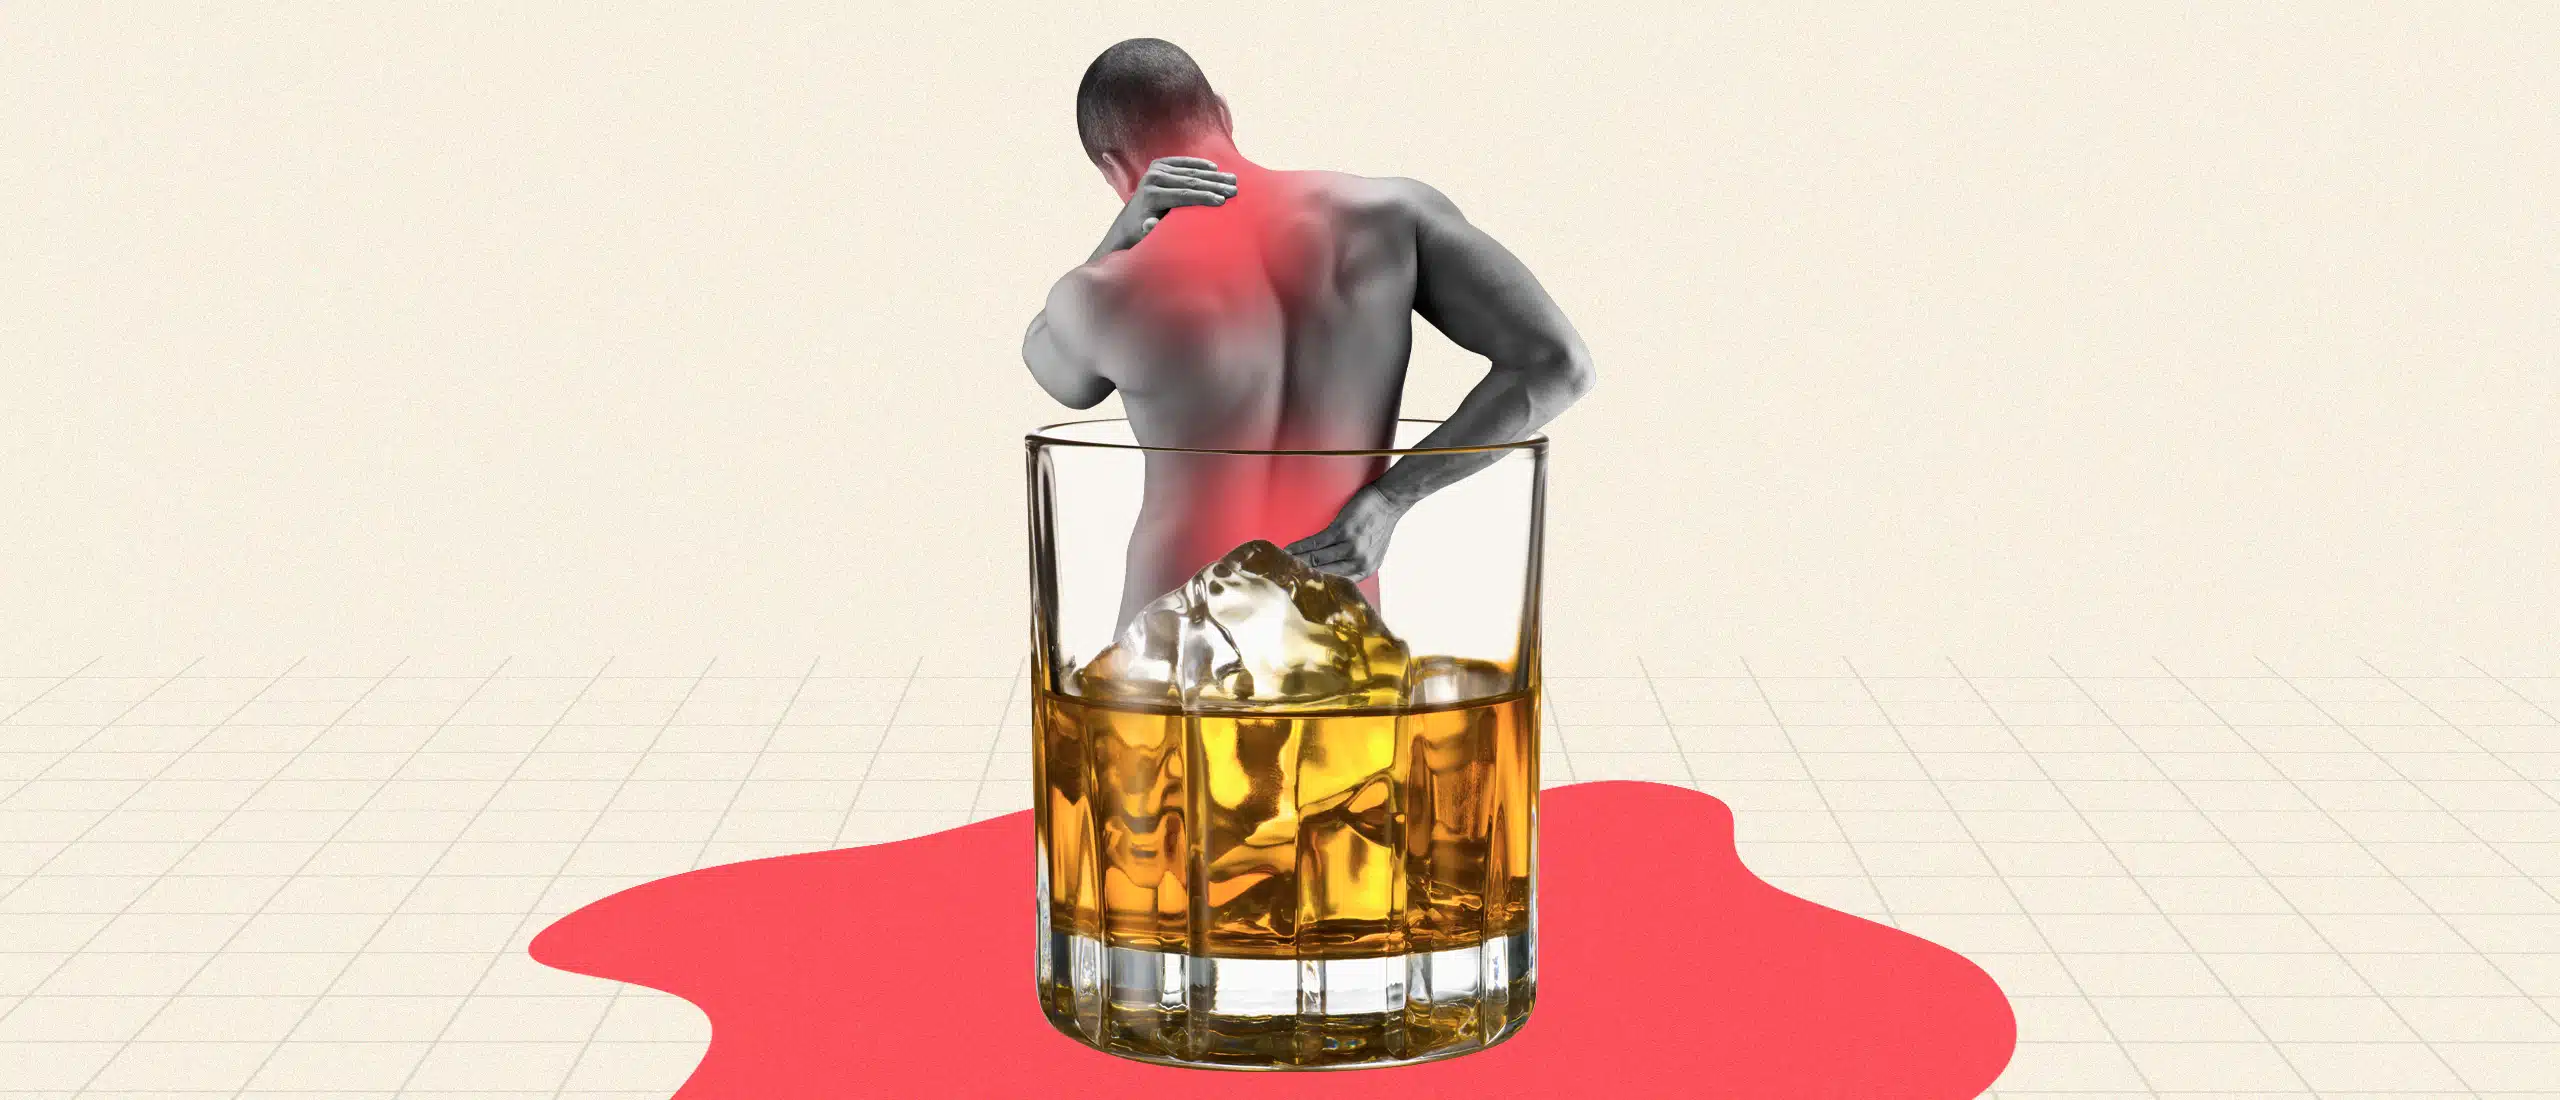 A man holding his back near a glass of whiskey